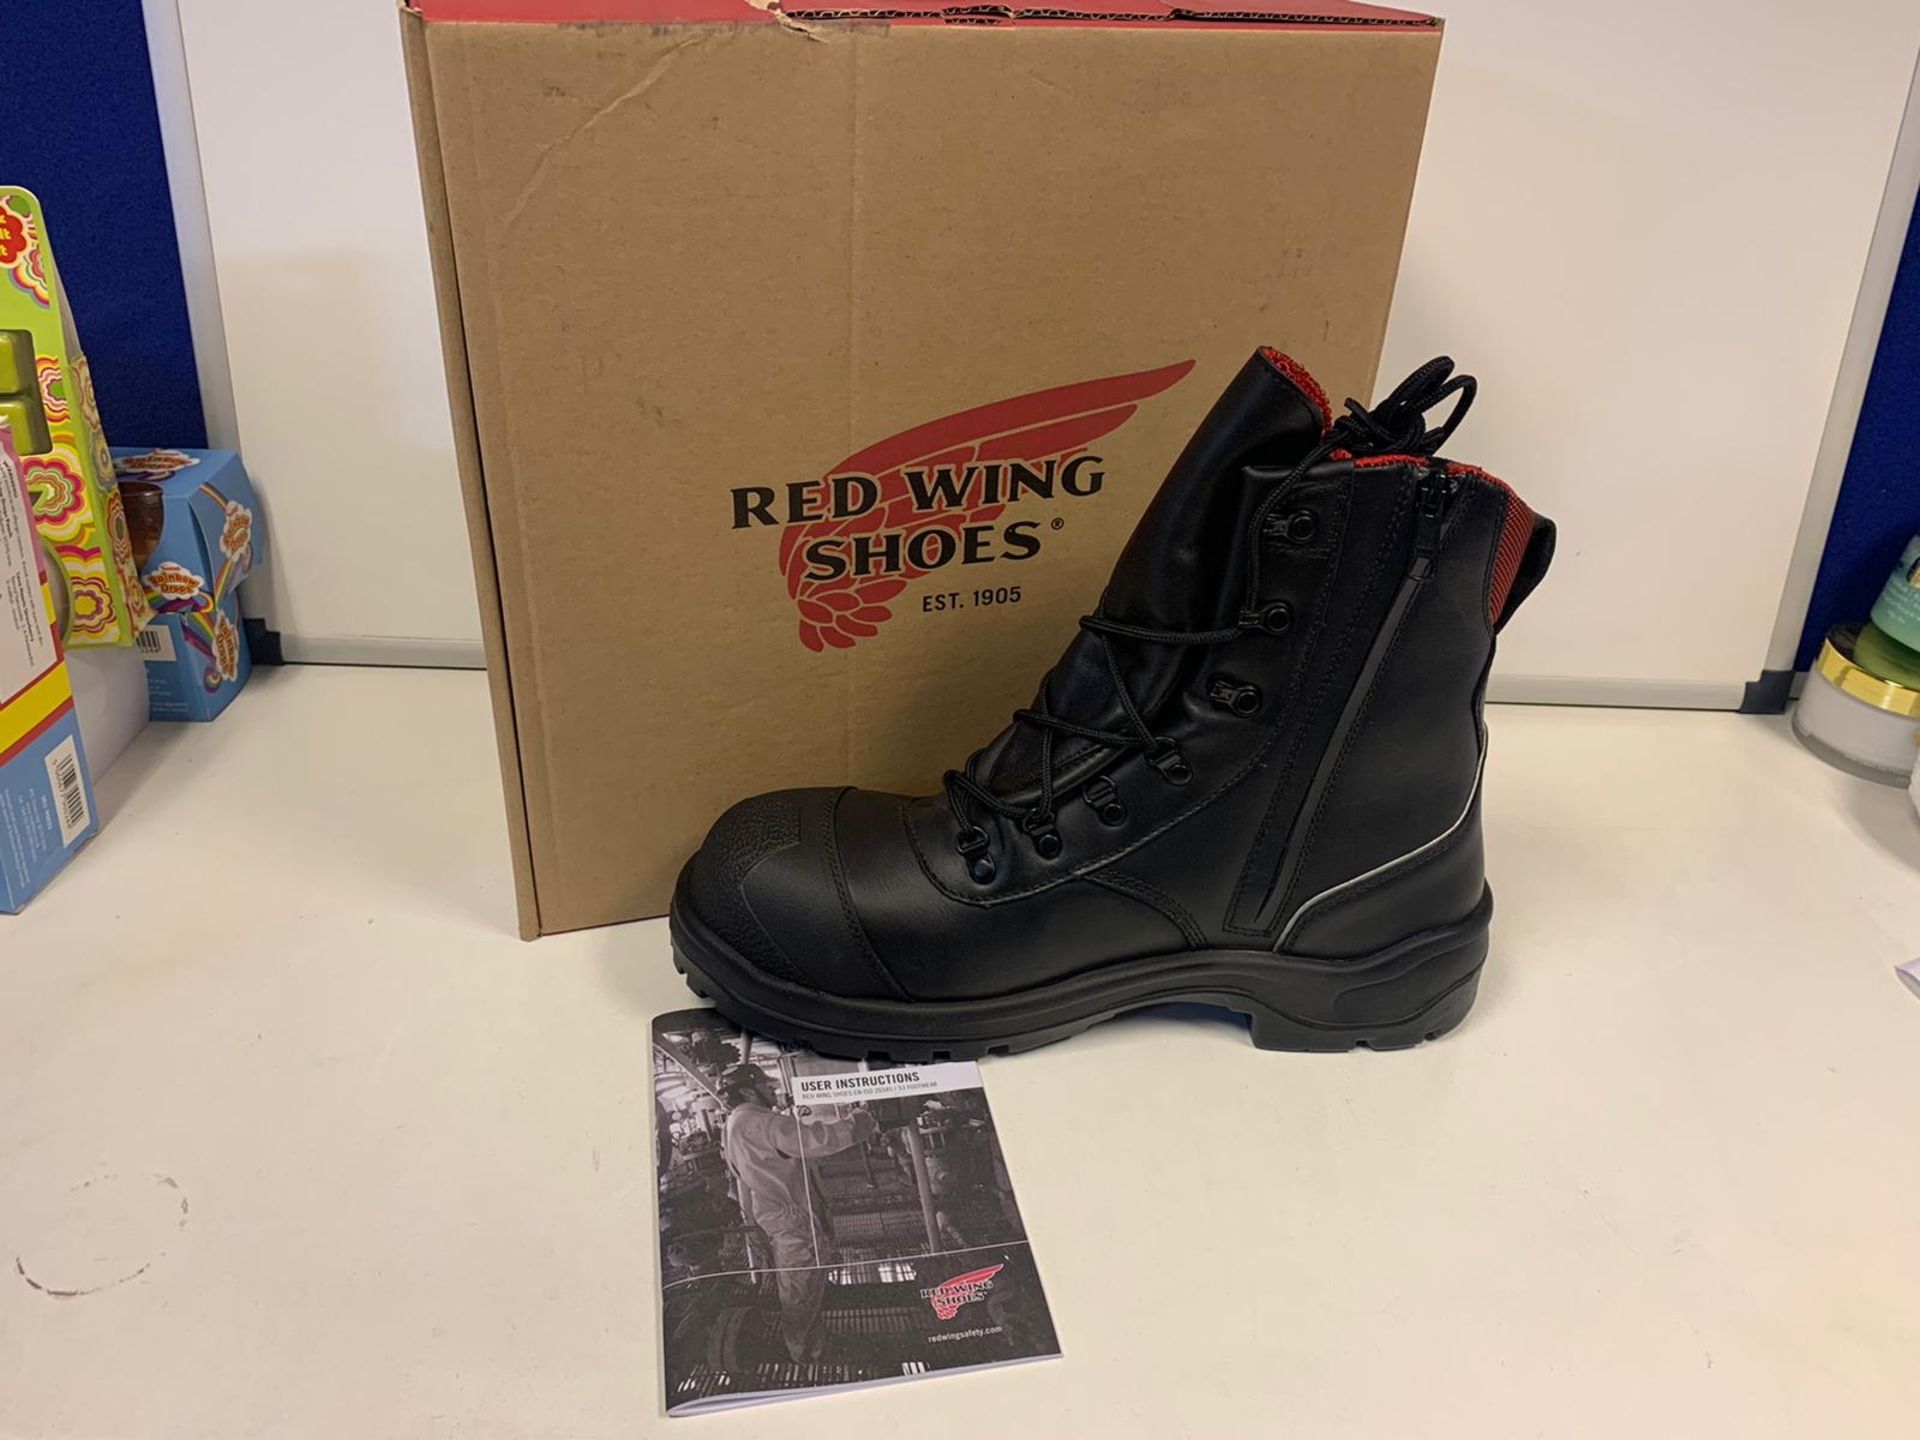 6 X BRAND NEW RED WING SHOES PUNCTURE RESISTANT WORK BOOTS SIZE 3.5 IN 1 BOX